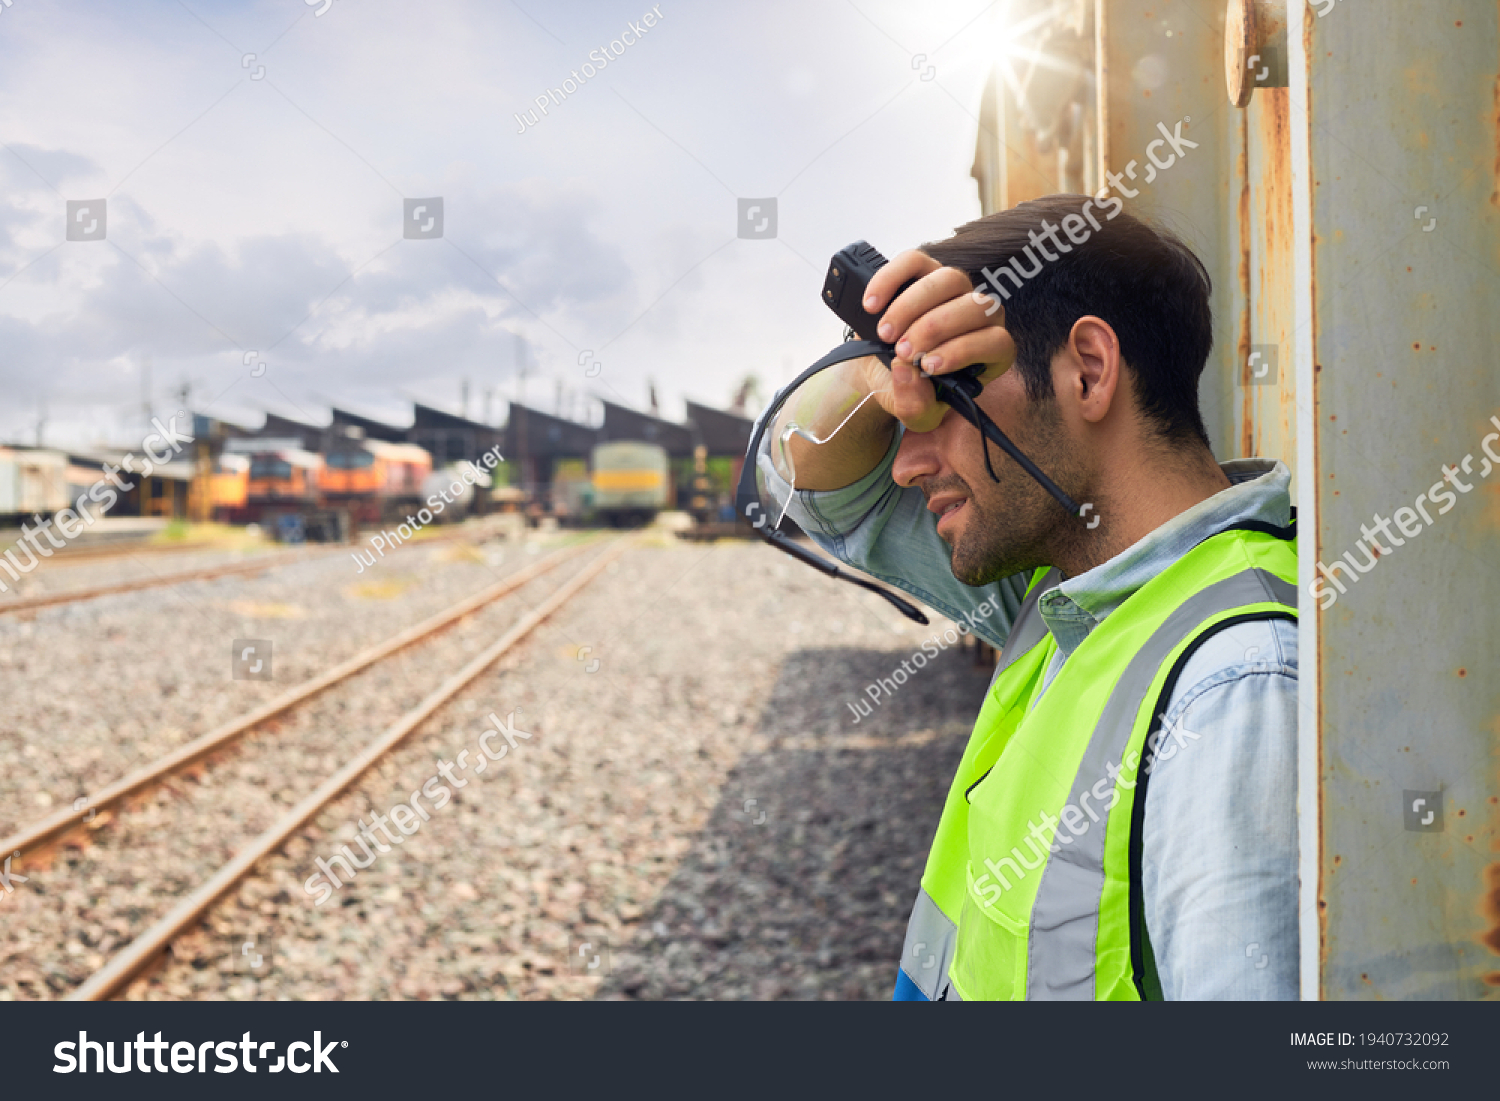 A Railway engineer or Rail transport technician wearing a green safety vest is standing to rest or working outdoors beside a freight train on a hot and sunny day. #1940732092